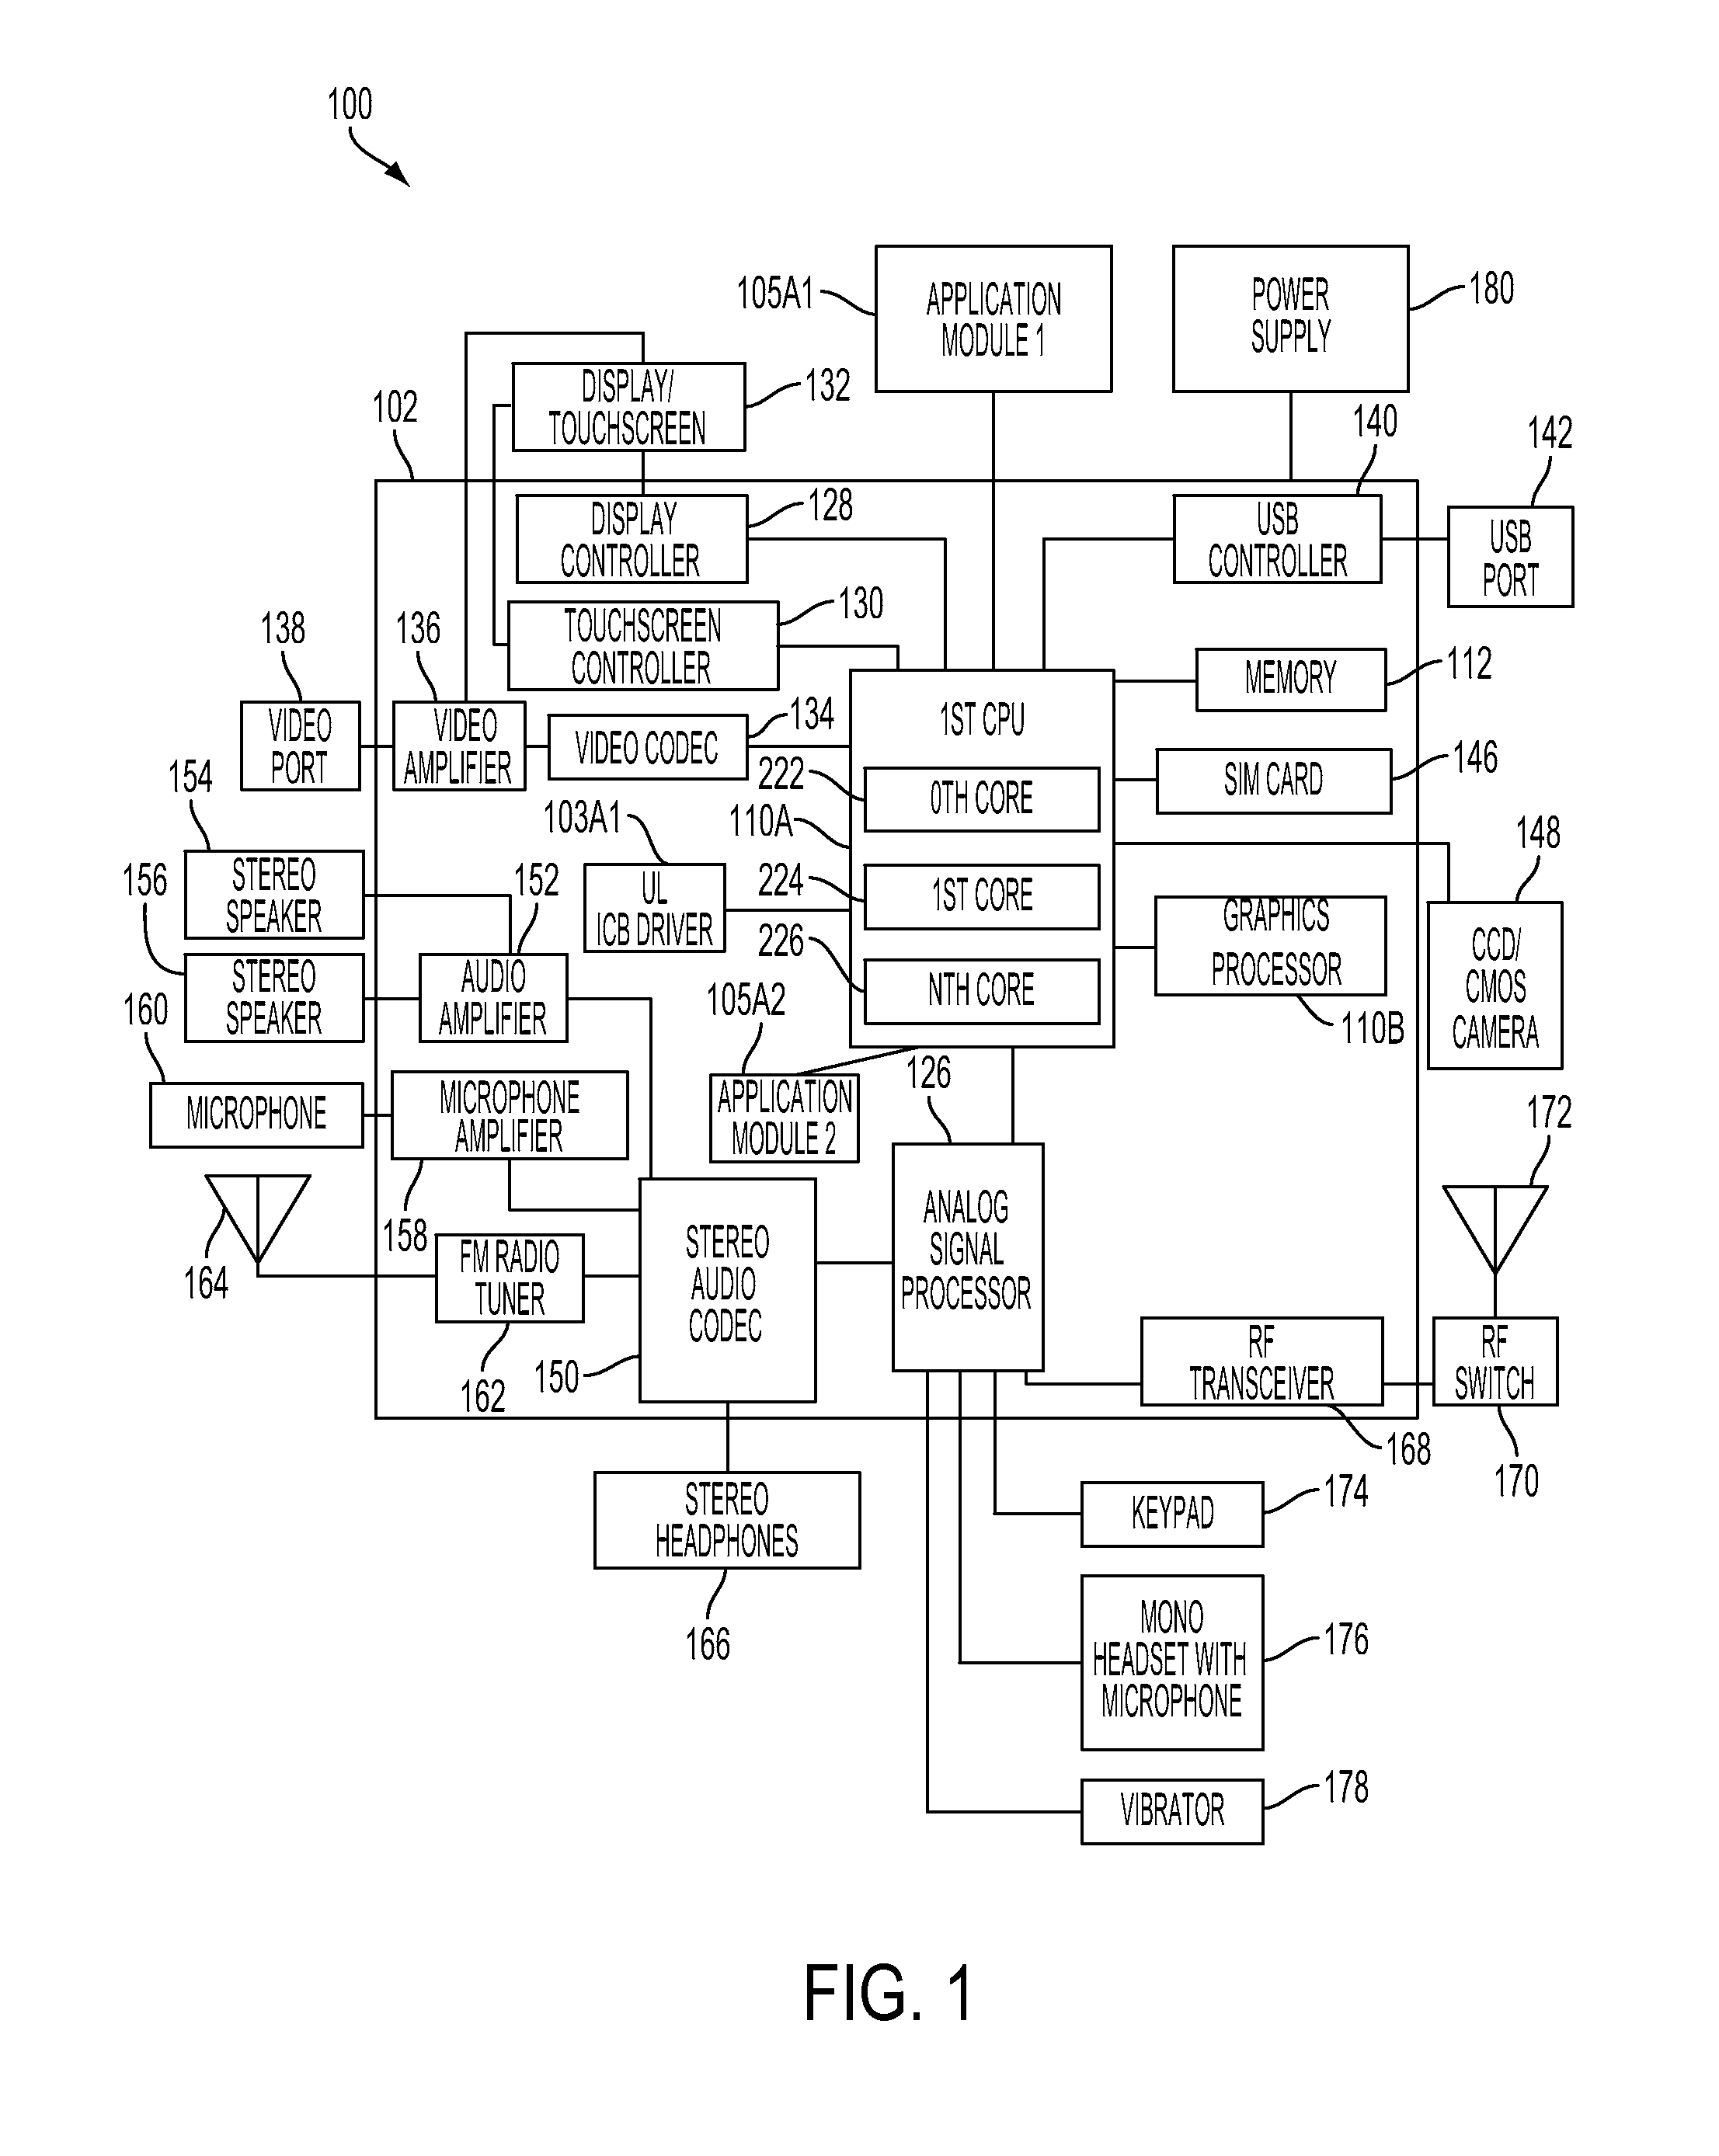 Method and System for Tracking and Selecting Optimal Power Conserving Modes of a PCD